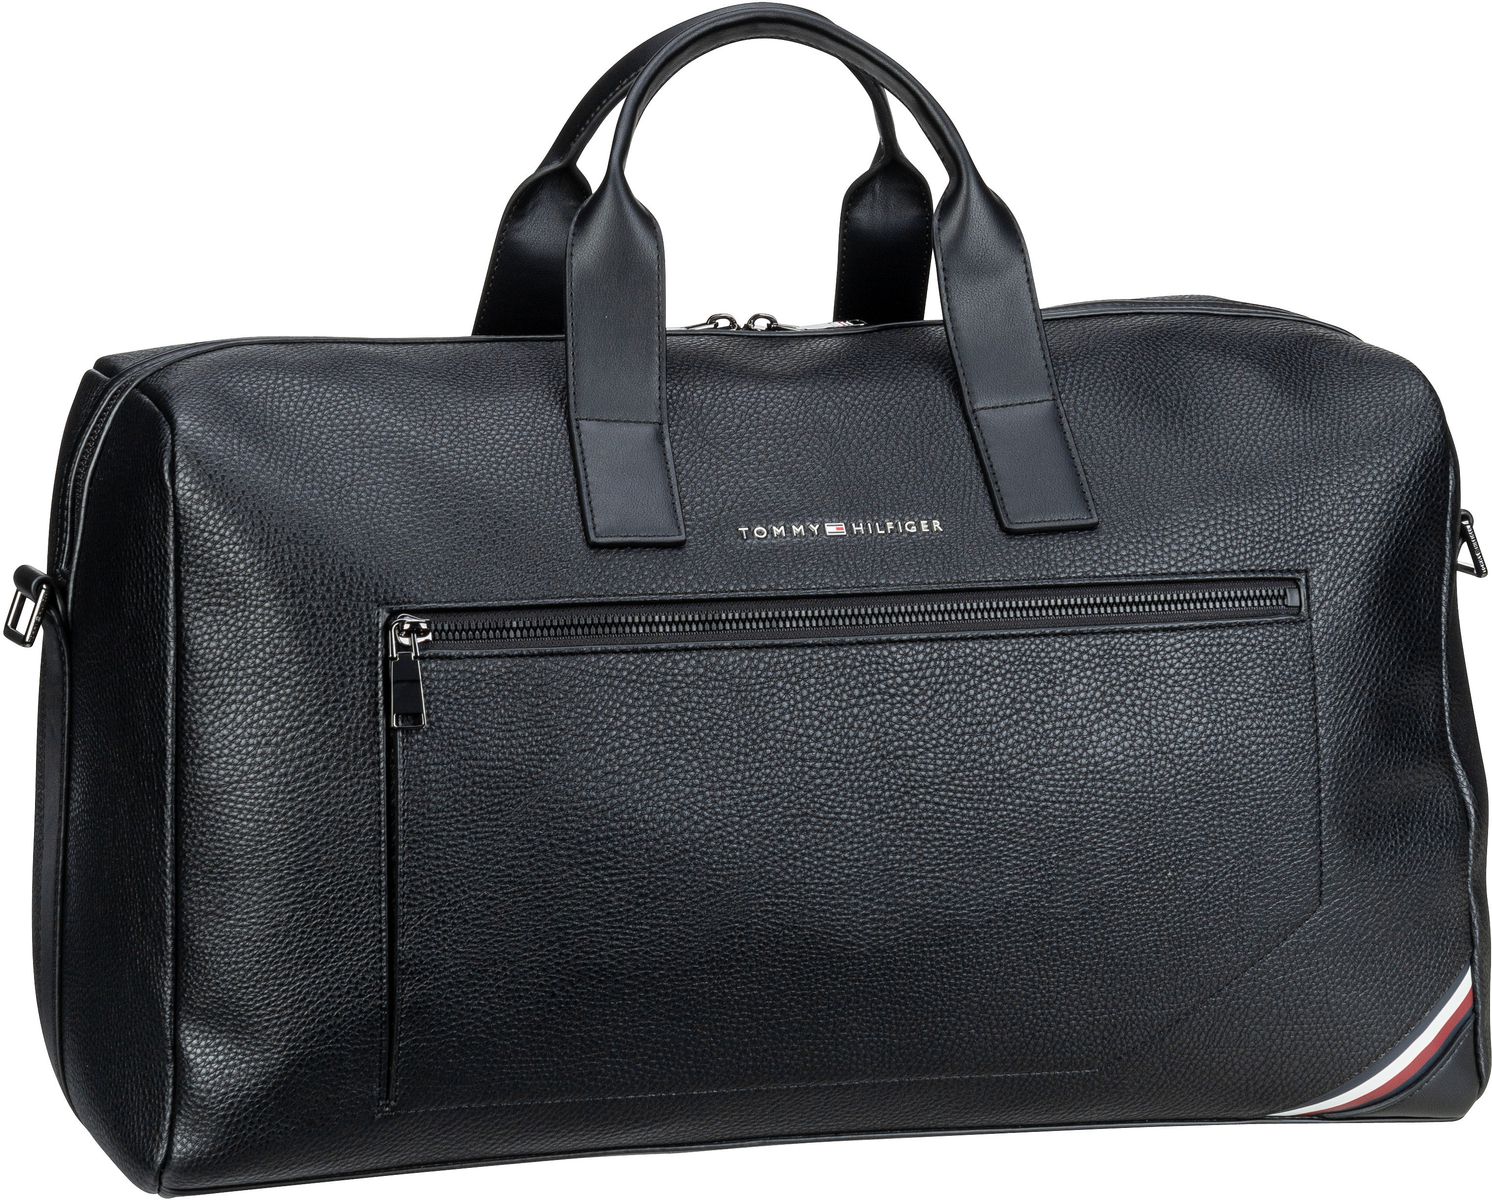 Tommy Hilfiger TH Central Duffle FA23  in Black (24.5 Liter), Weekender